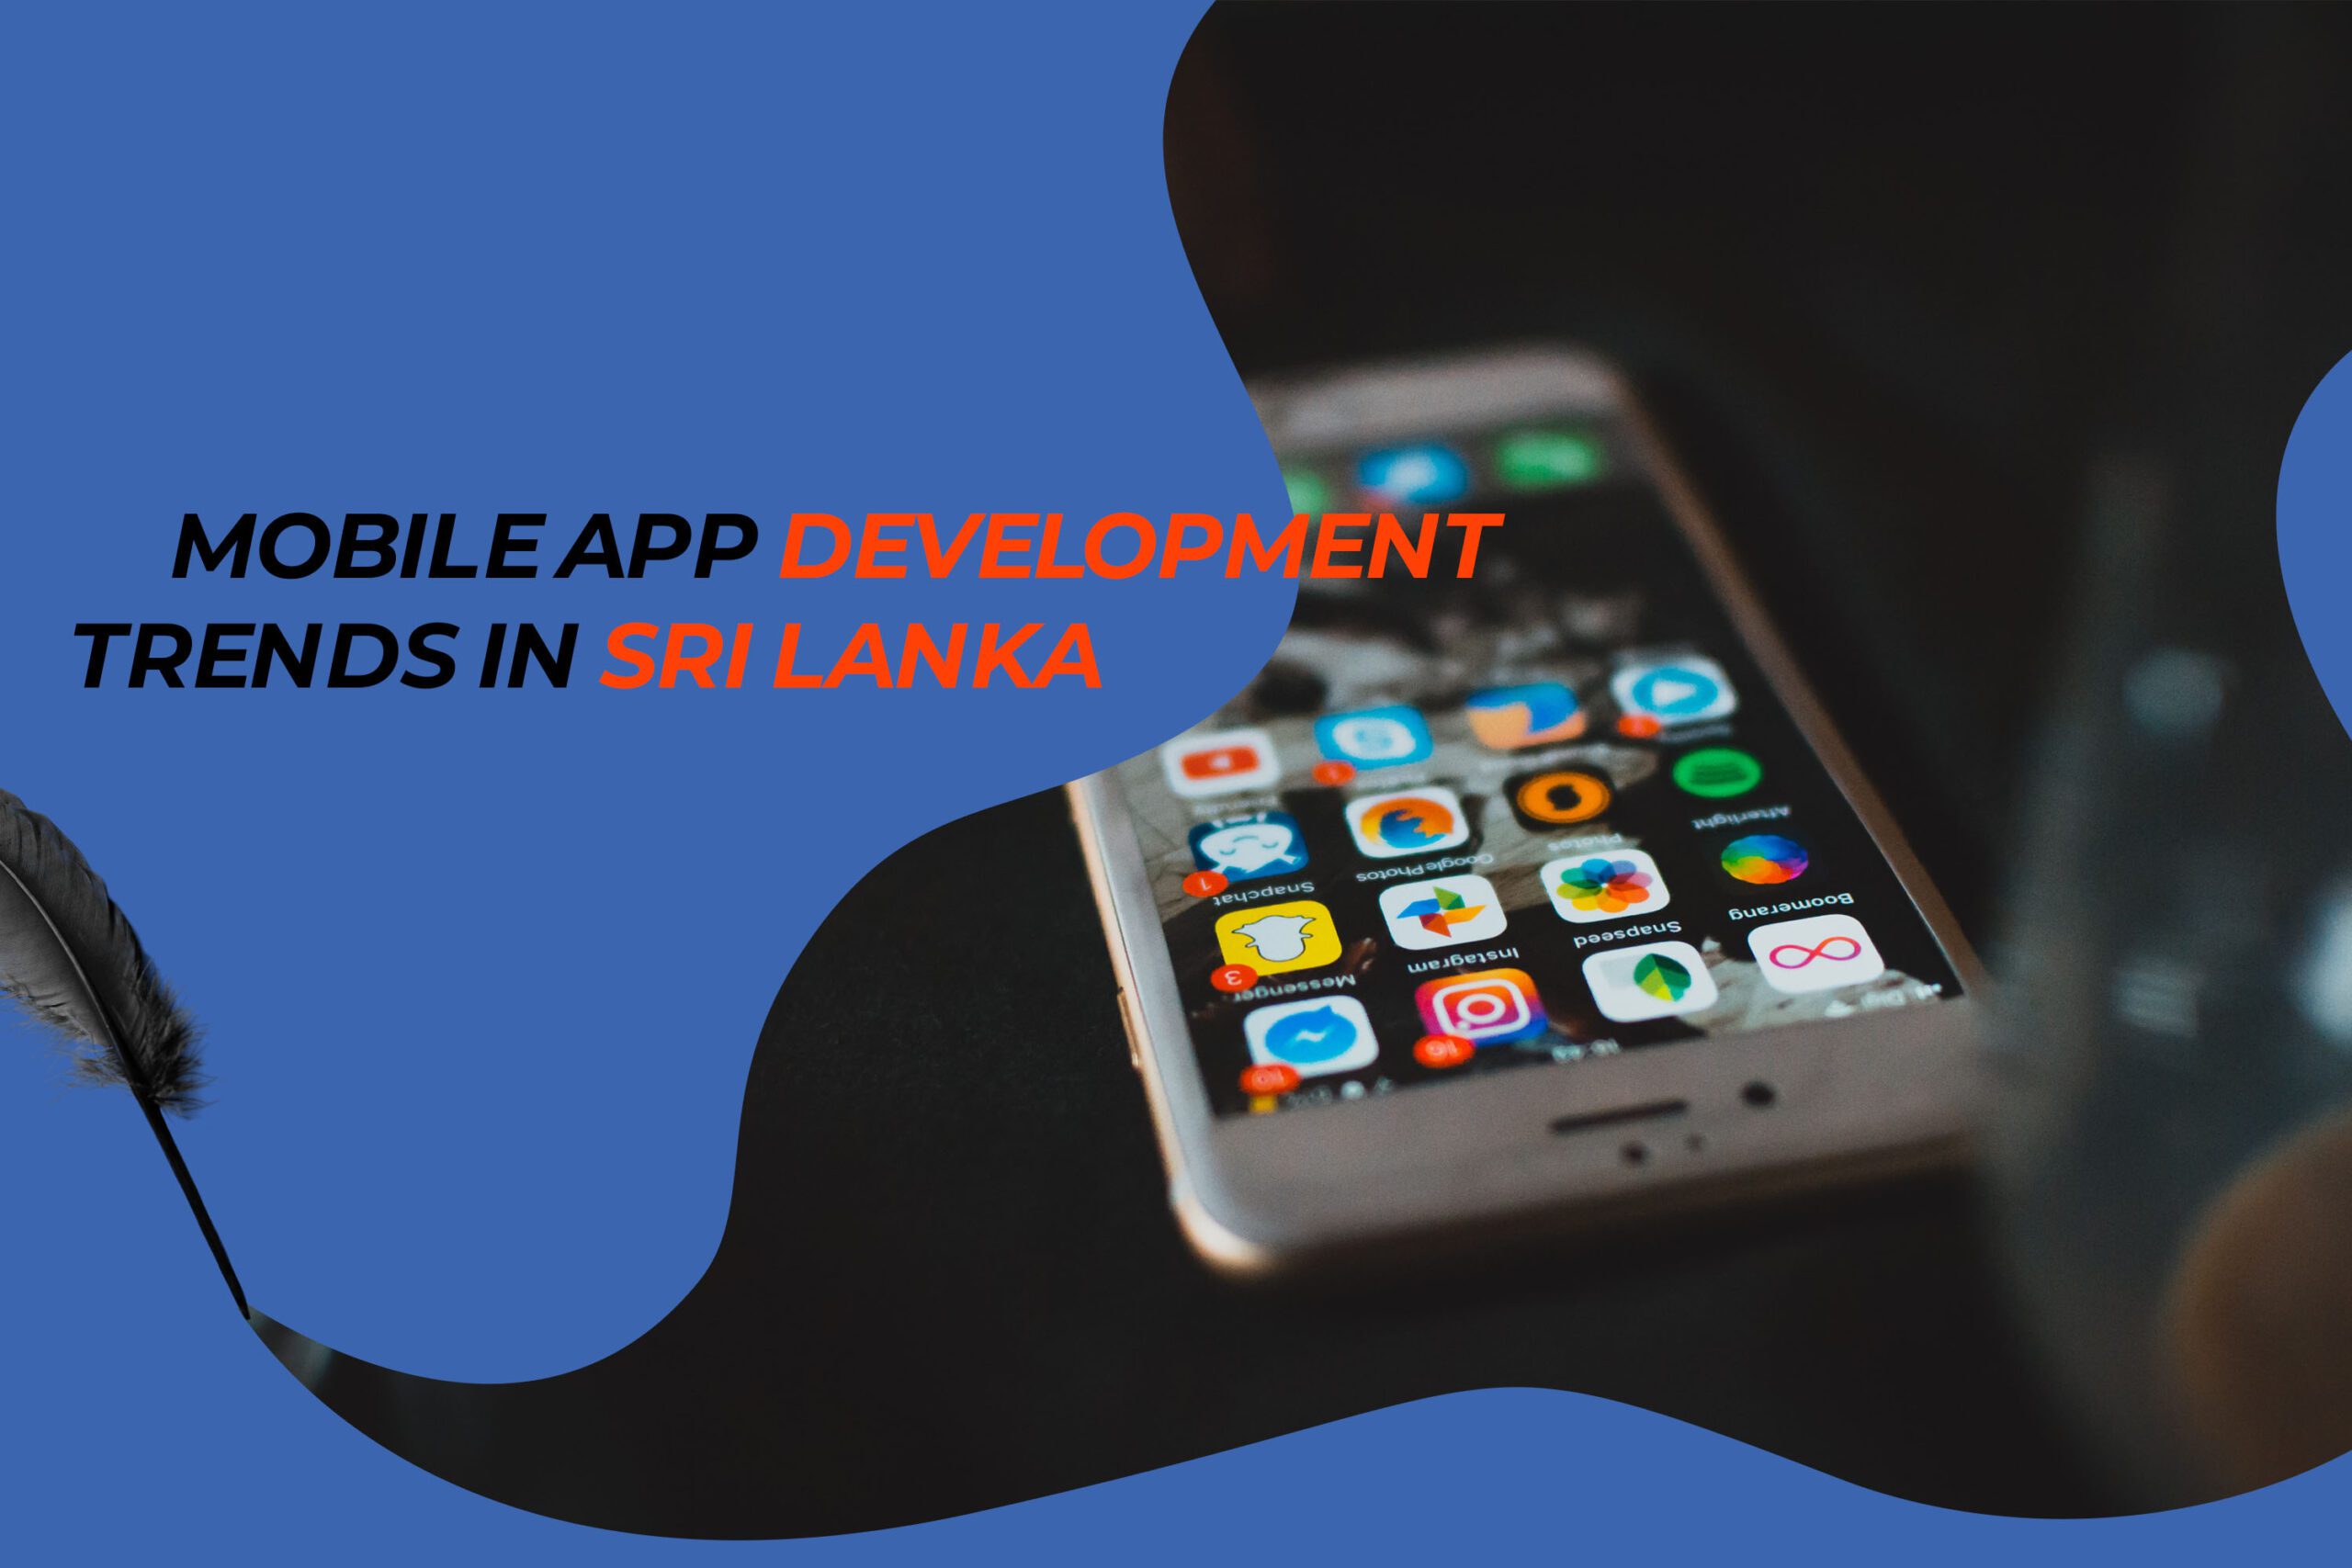 Mobile App Development Trends in Sri Lanka: Staying Ahead of the Curve